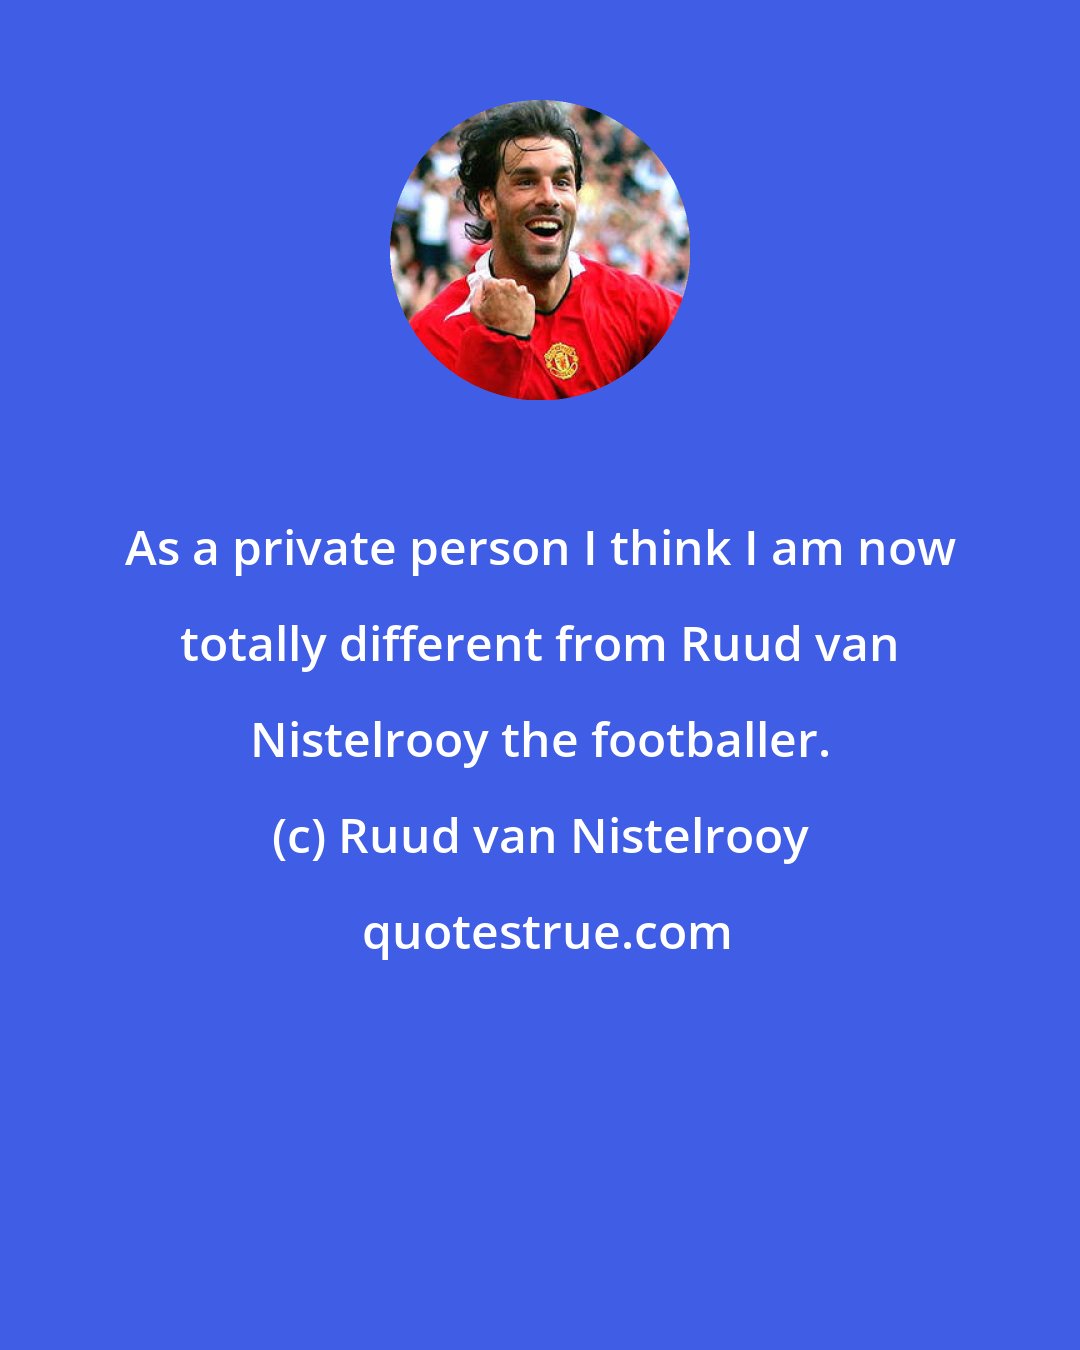 Ruud van Nistelrooy: As a private person I think I am now totally different from Ruud van Nistelrooy the footballer.